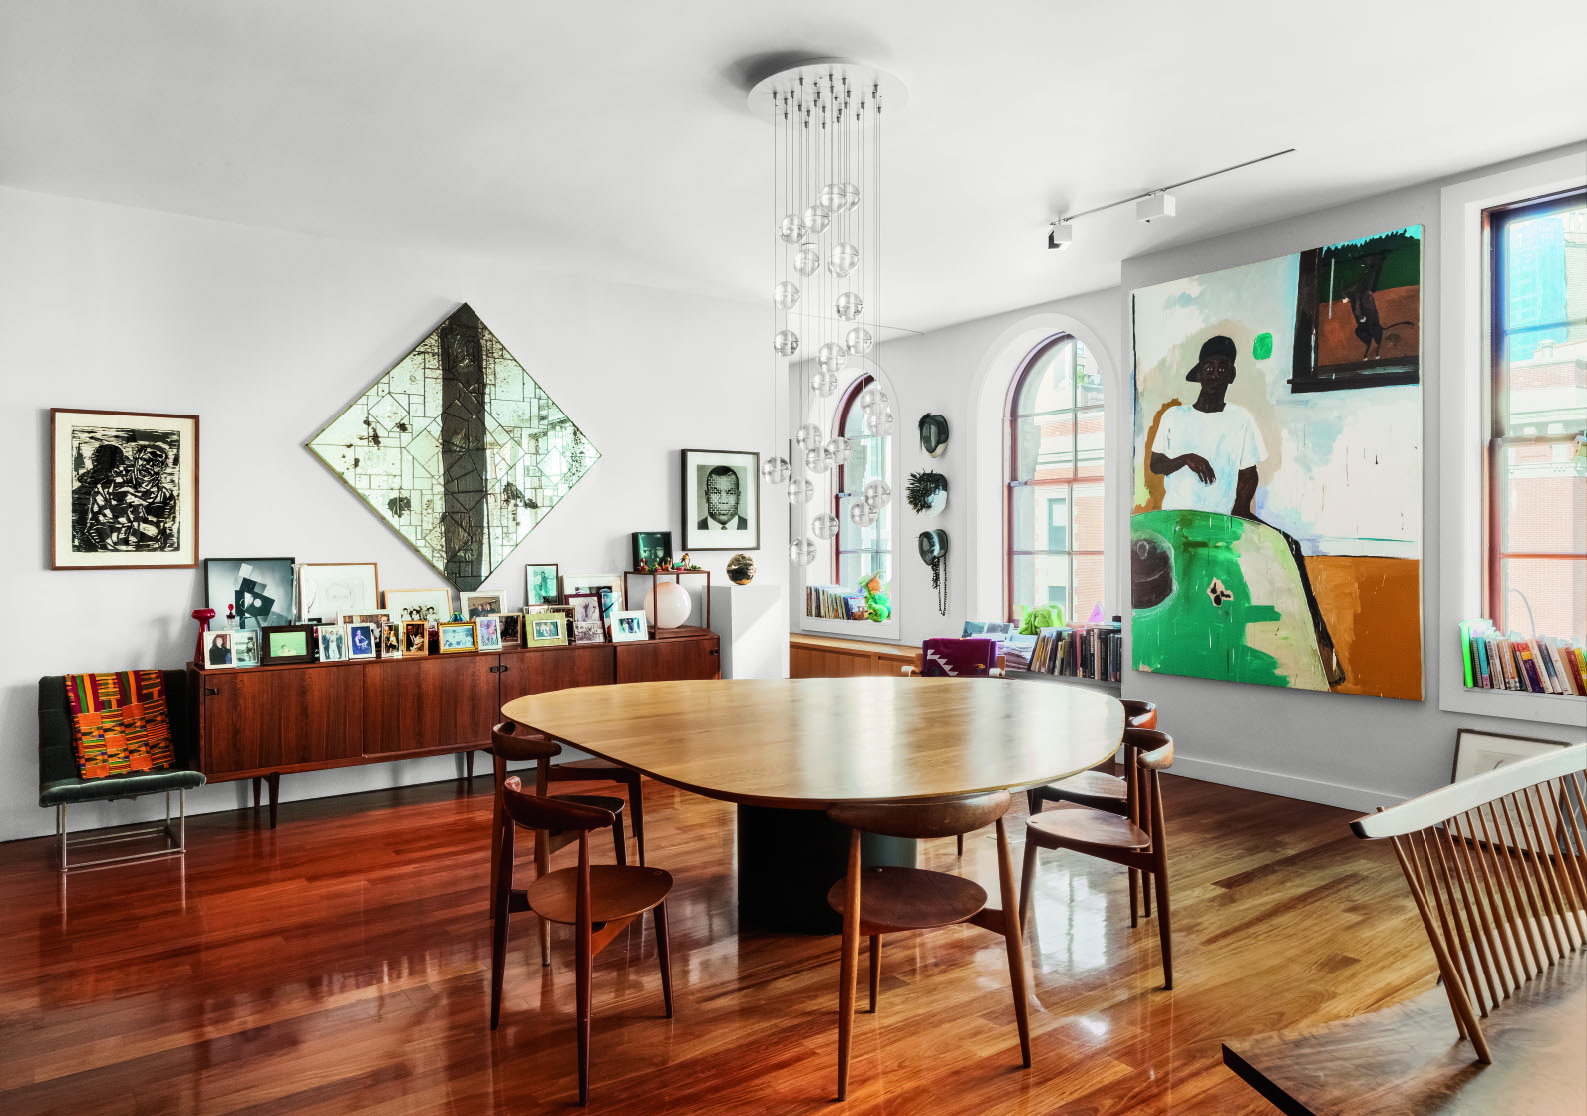 The Tribeca home of Bernard Lumpkin and Carmine Boccuzzi features works by Black artists, including Henry Taylor, Rashid Johnson and Derrick Adams, seen here.